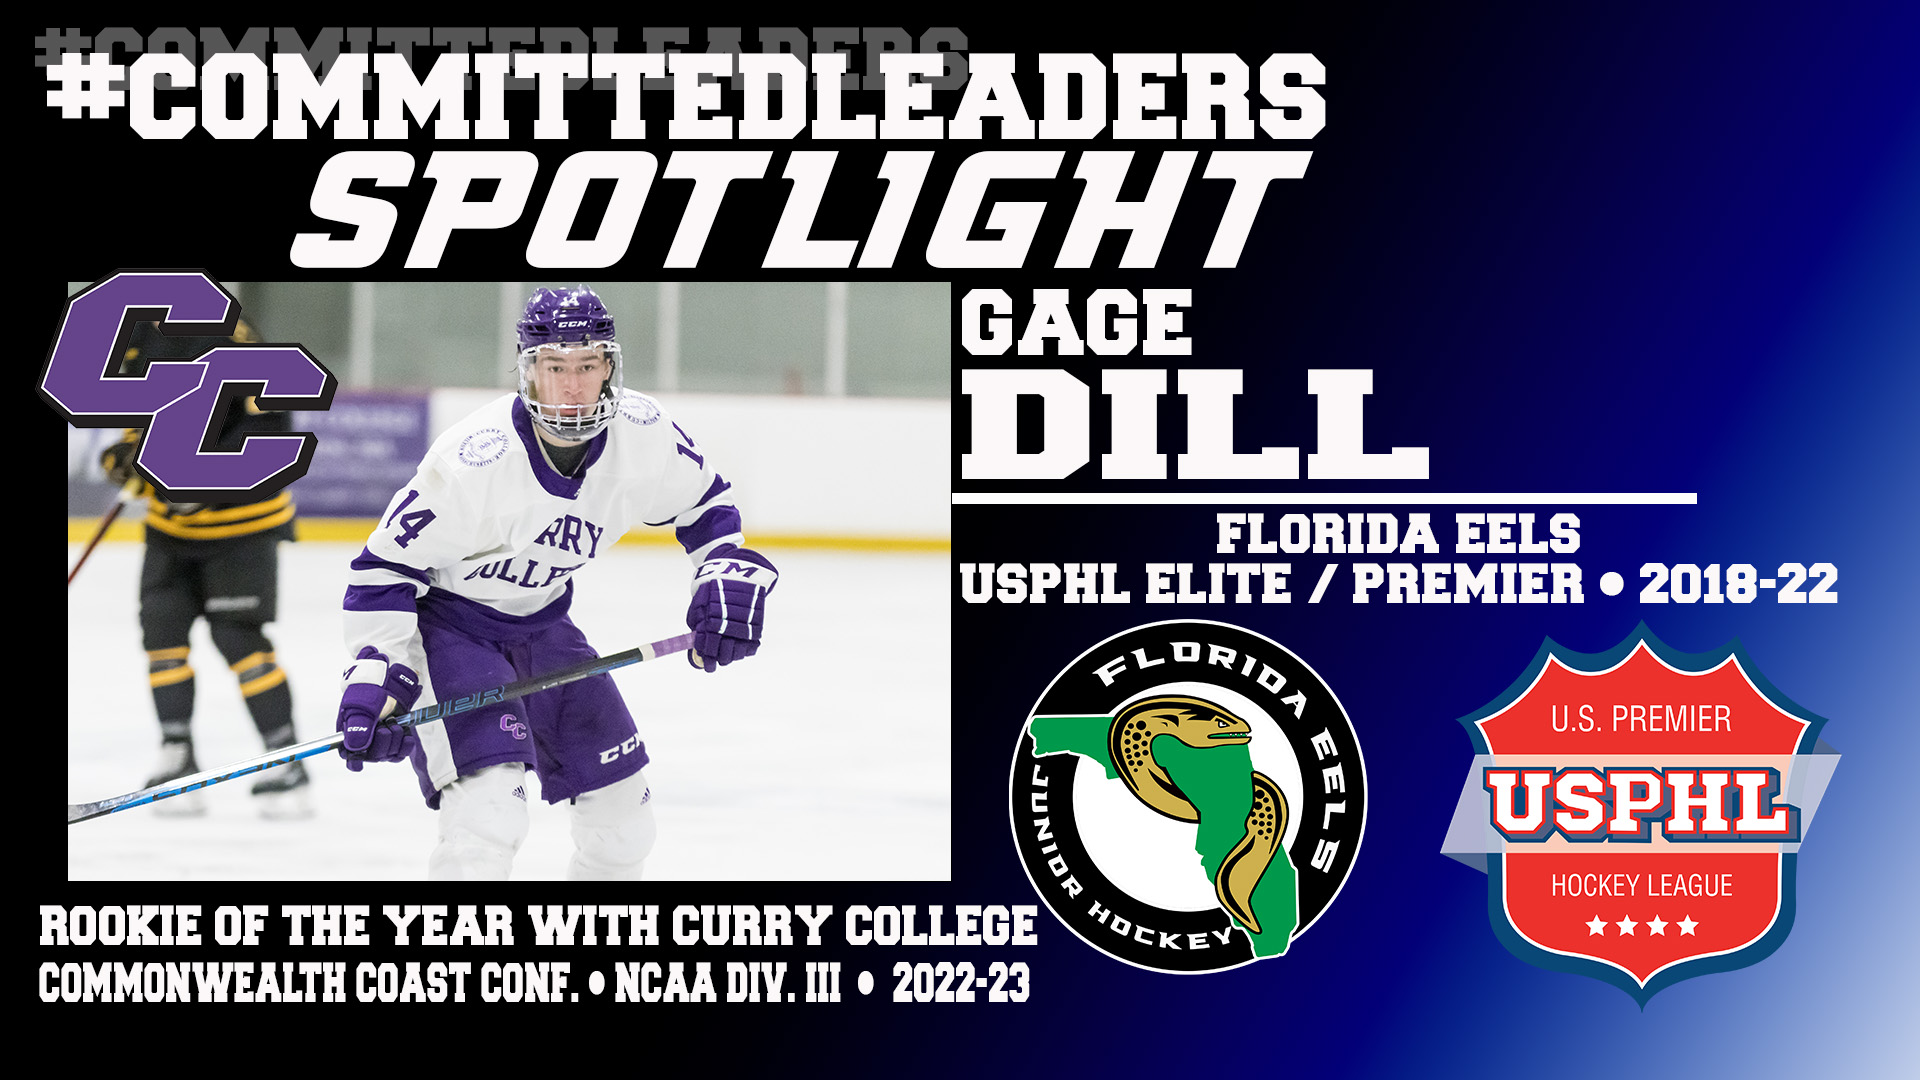 #CommittedLeaders Spotlight: Former Eel Gage Dill Headed Back To Curry After CCC Rookie Of the Year Campaign